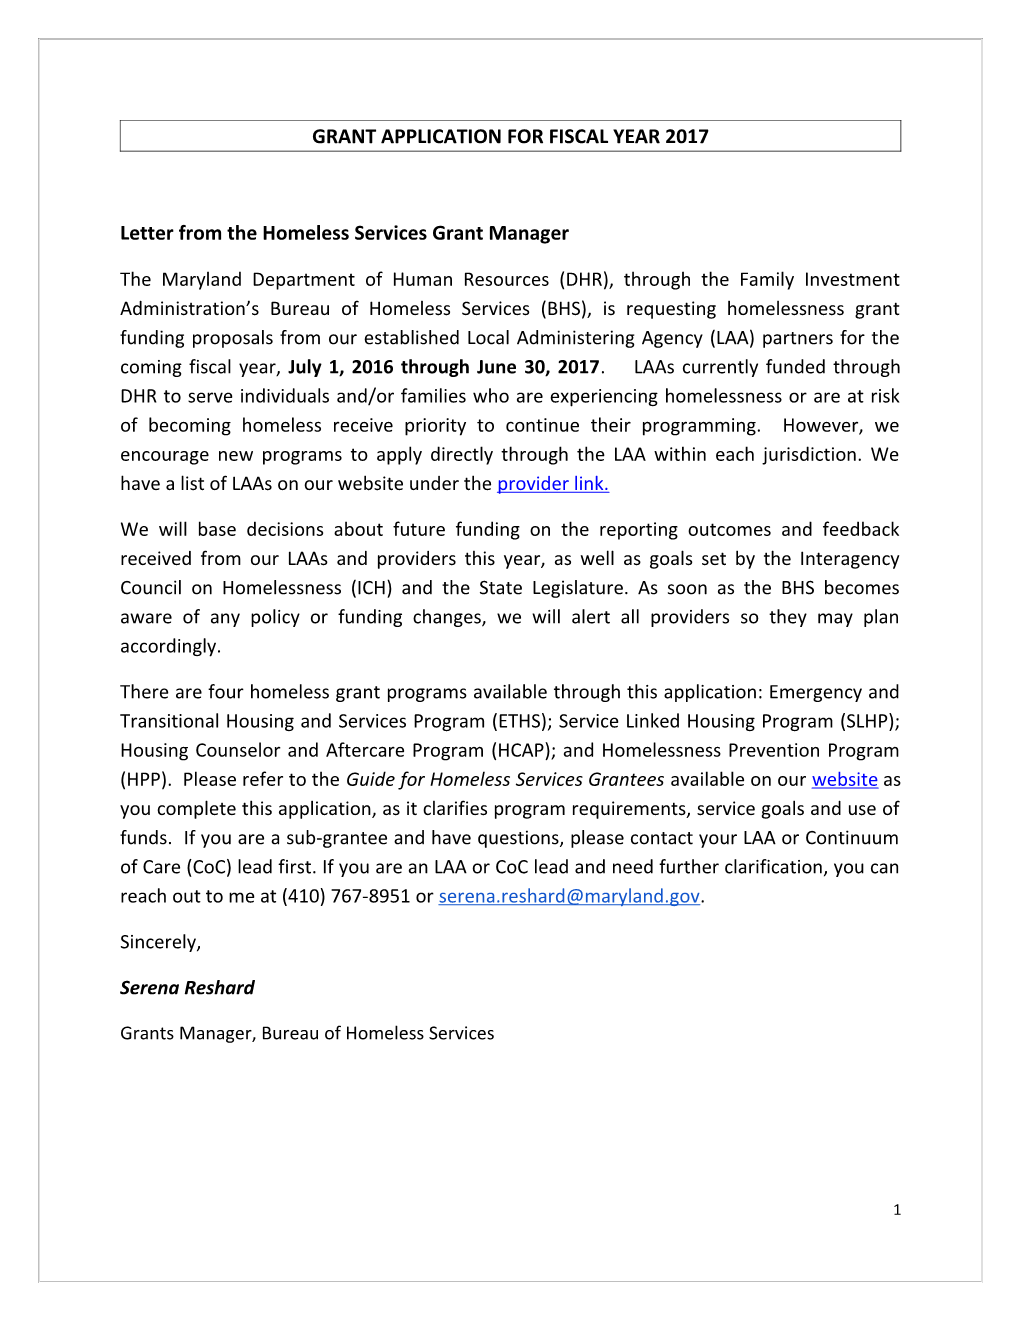 Letter from the Homeless Services Grant Manager